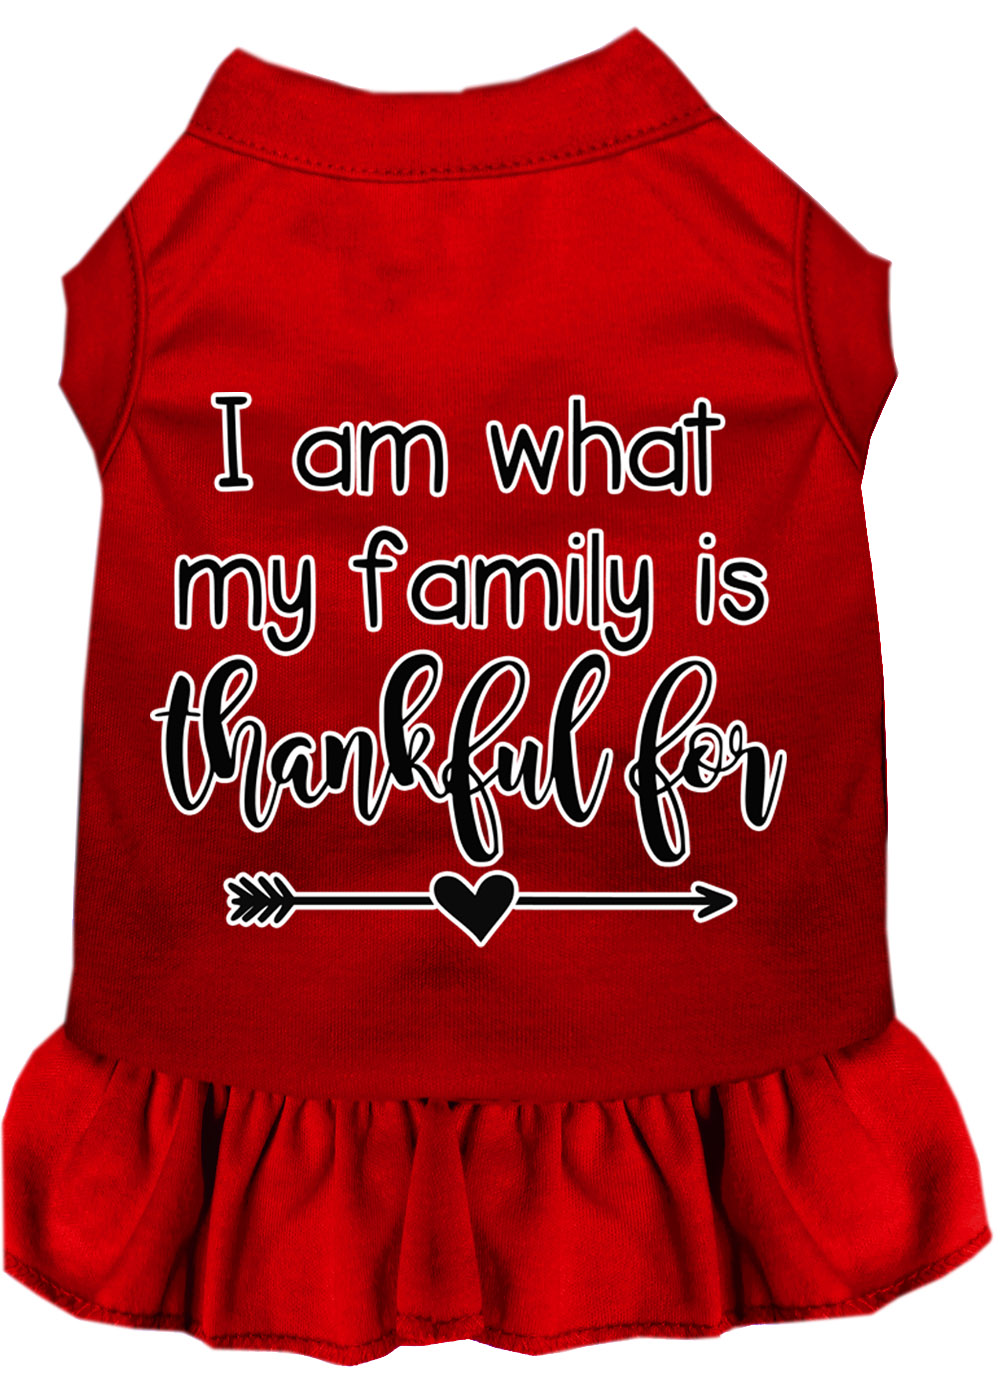 I Am What My Family is Thankful For Screen Print Dog Dress Red Lg